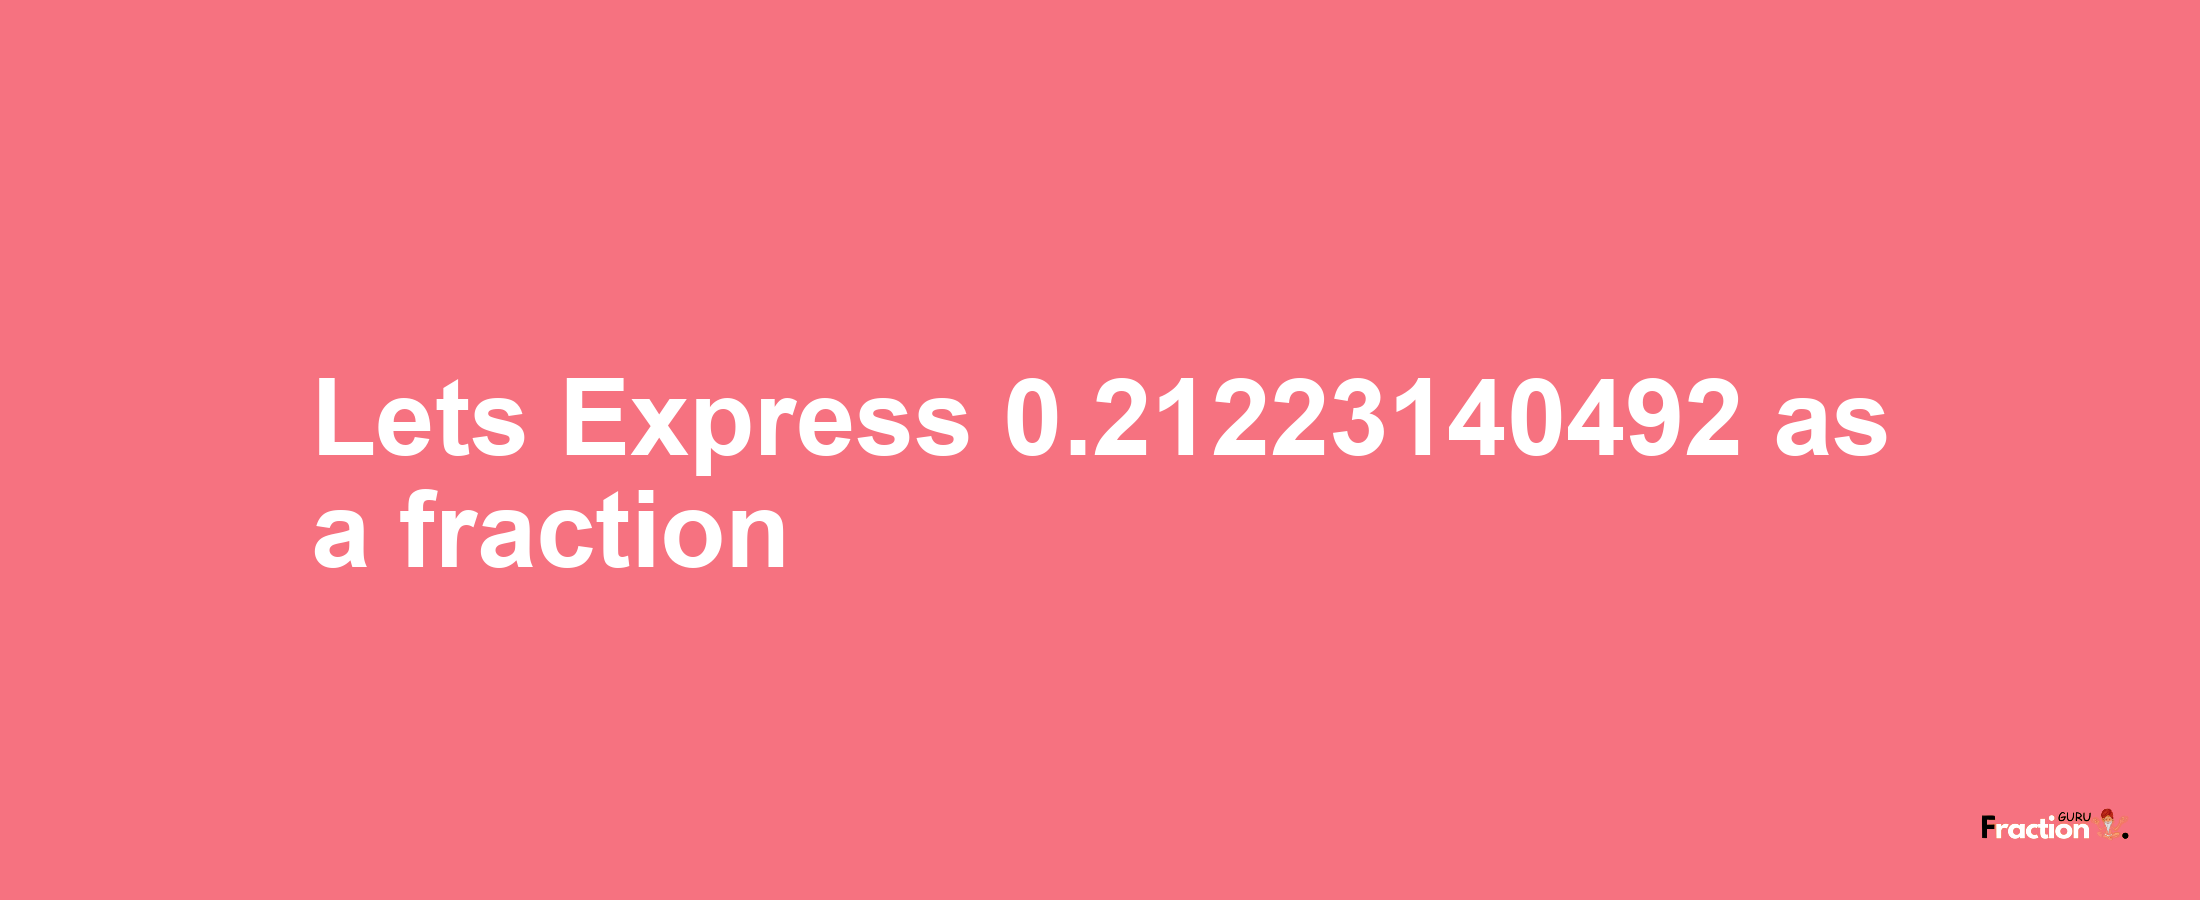 Lets Express 0.21223140492 as afraction